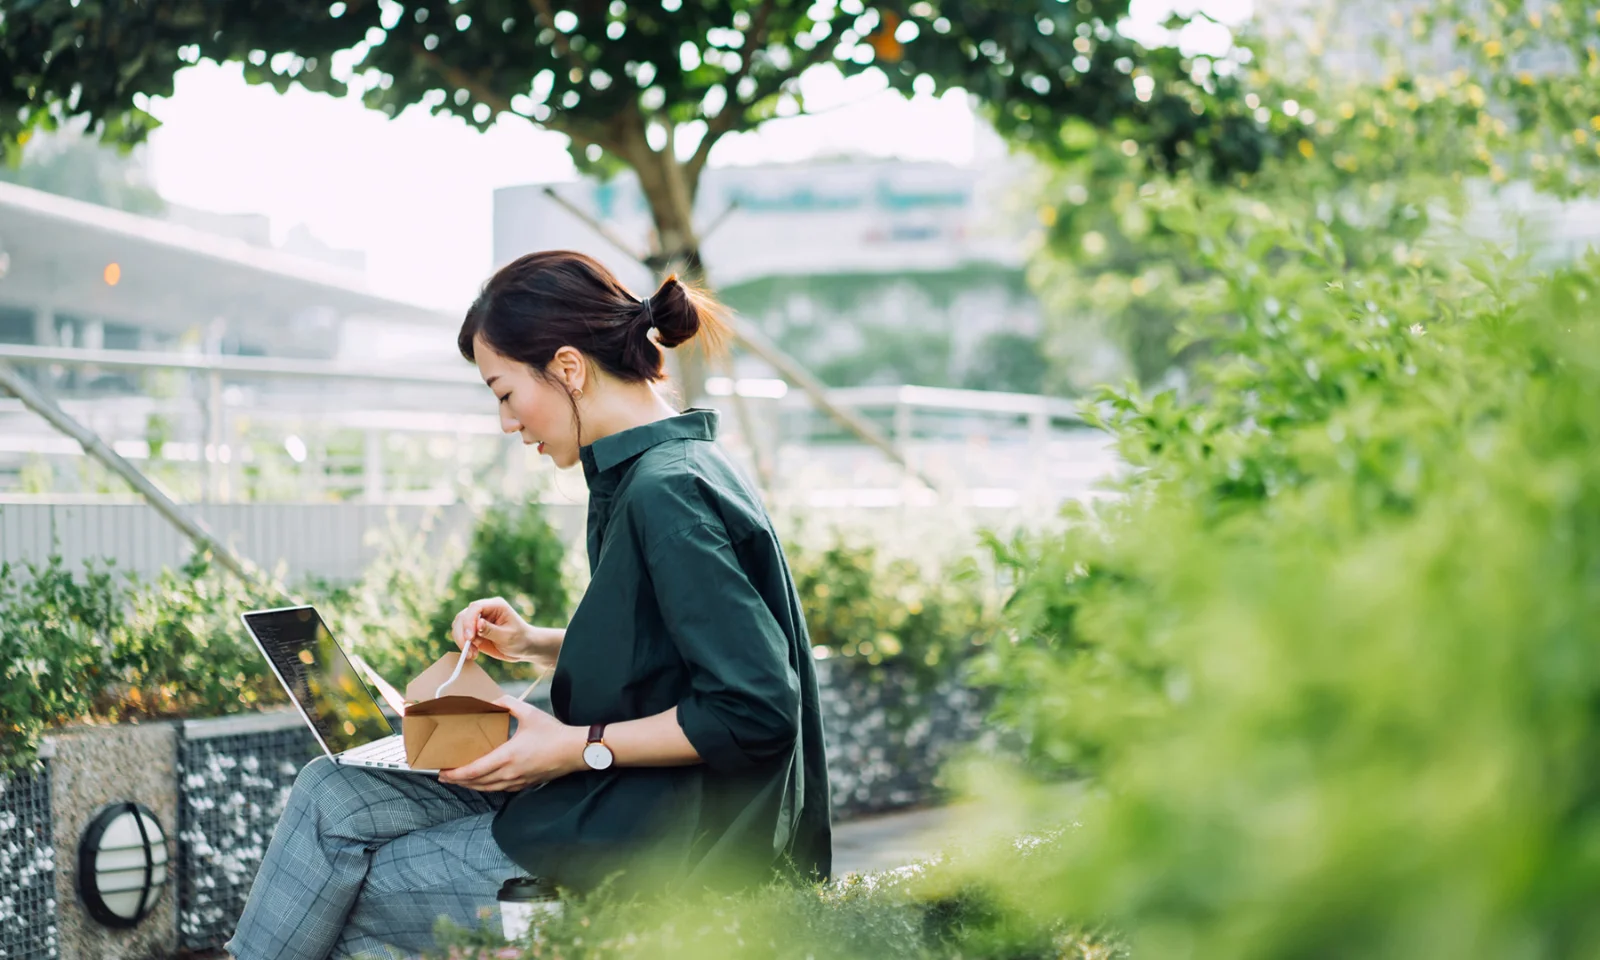 The image depicts a woman working on a laptop outdoors, surrounded by lush greenery, while eating from a takeaway box. This scene symbolizes the integration of green practices into daily work life, highlighting the balance between productivity and sustainability. The setting emphasizes the importance of environmentally conscious choices in professional environments, representing the concept of green bond management and its role in promoting sustainable business practices.